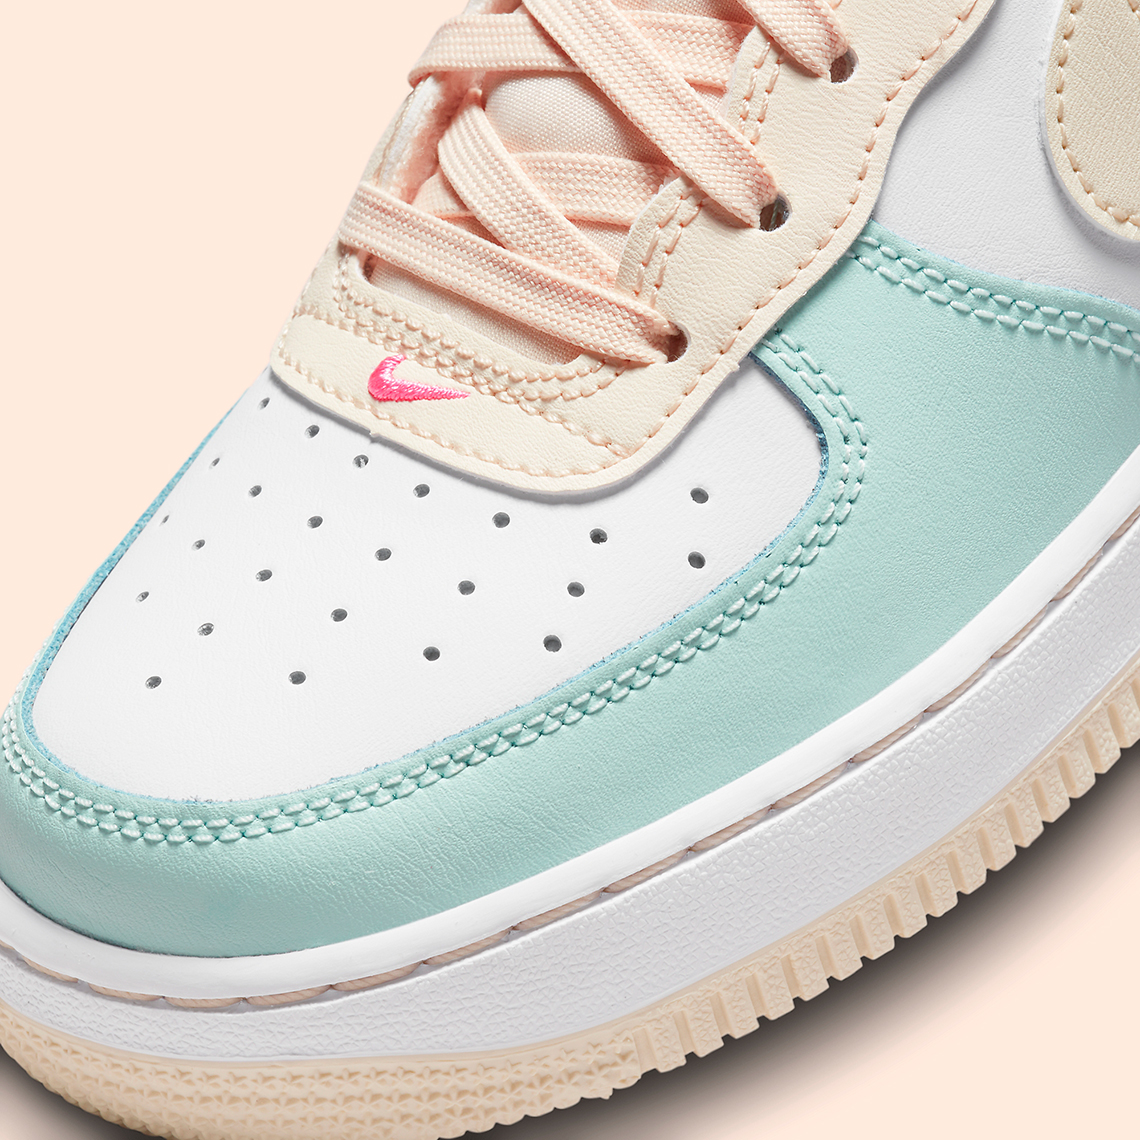 Nike Air Force 1 Low Emerald Rise Guava Ice Pink Spell Dv7762 300 1